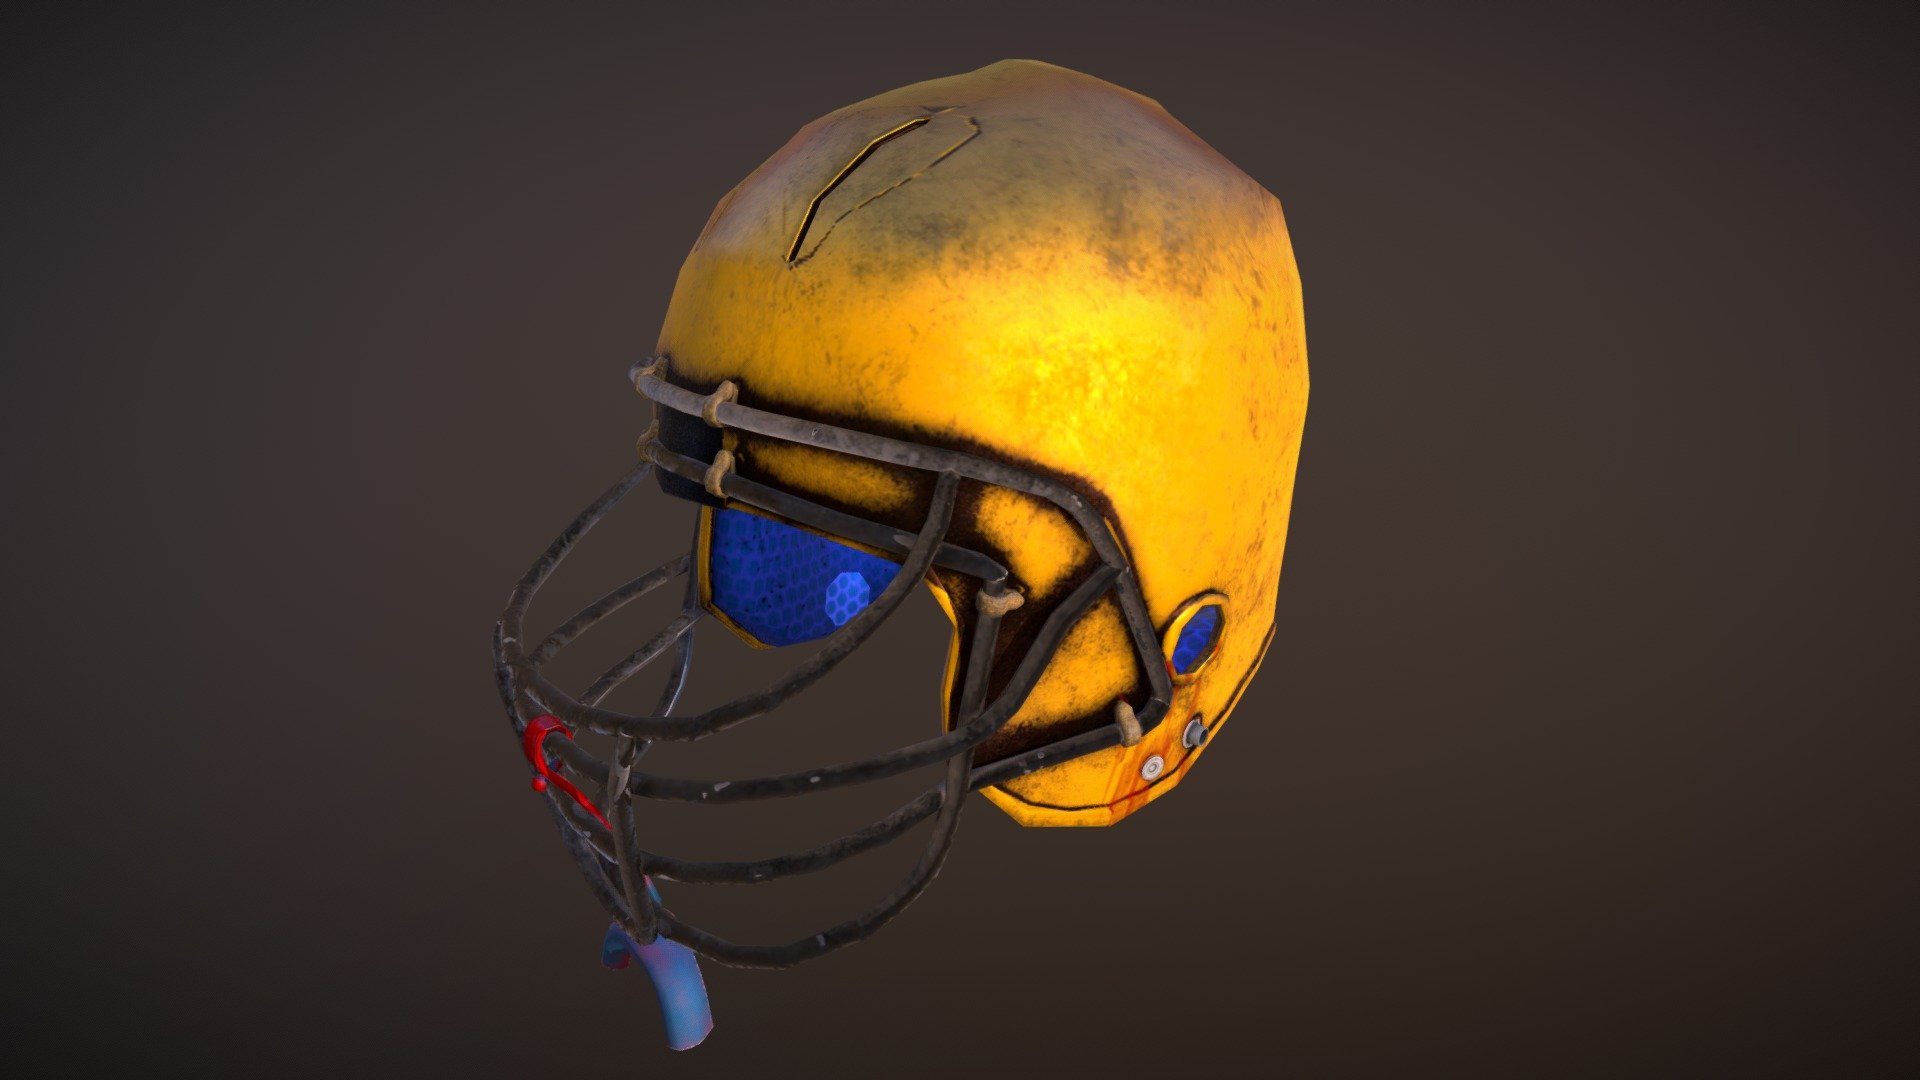 This was modeled in Maya. Actually, I did it in 2018. They have a few new tools and I wanted to give them a try. I didn’t have a particular team in mind, I’ve just always wanted to make a football helmet. Check it out and let me know what you think 3d model